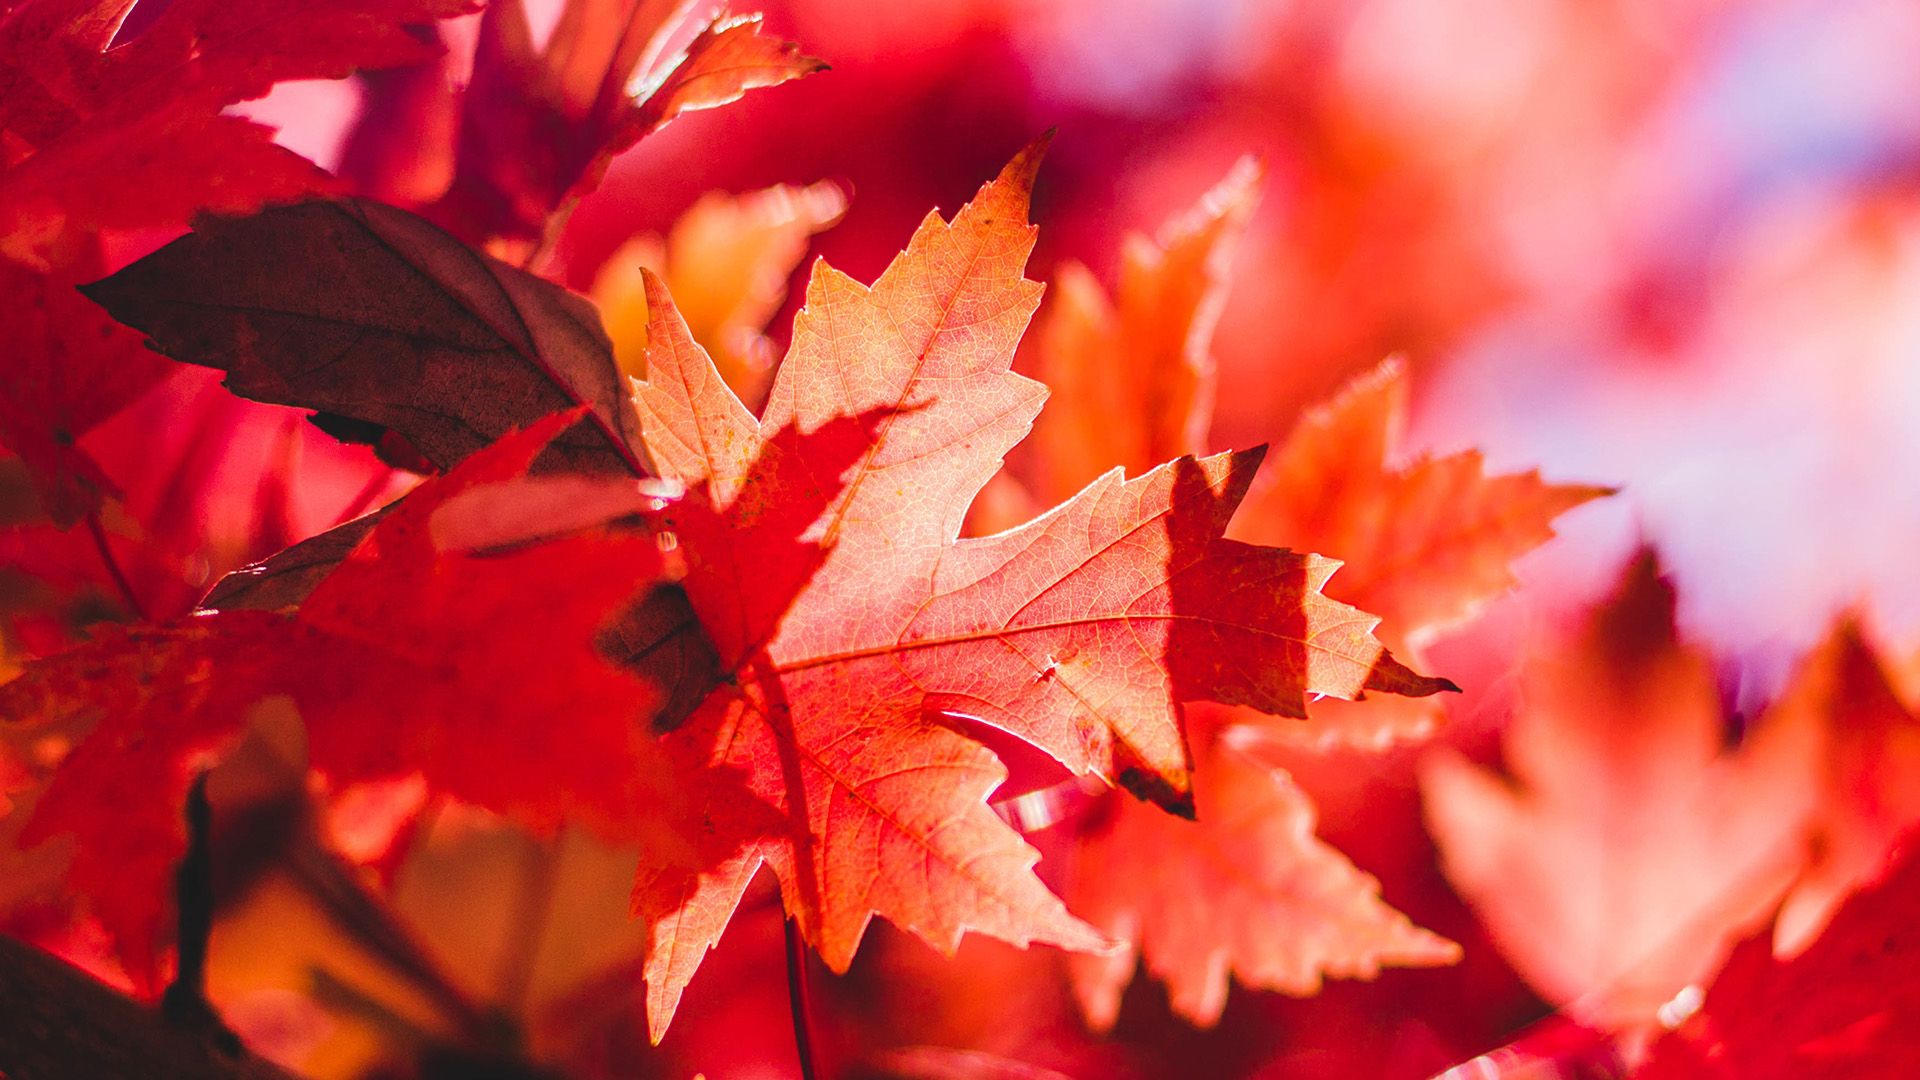 Maple Leaf Flower Red Fall Autumn Nature Wallpaper